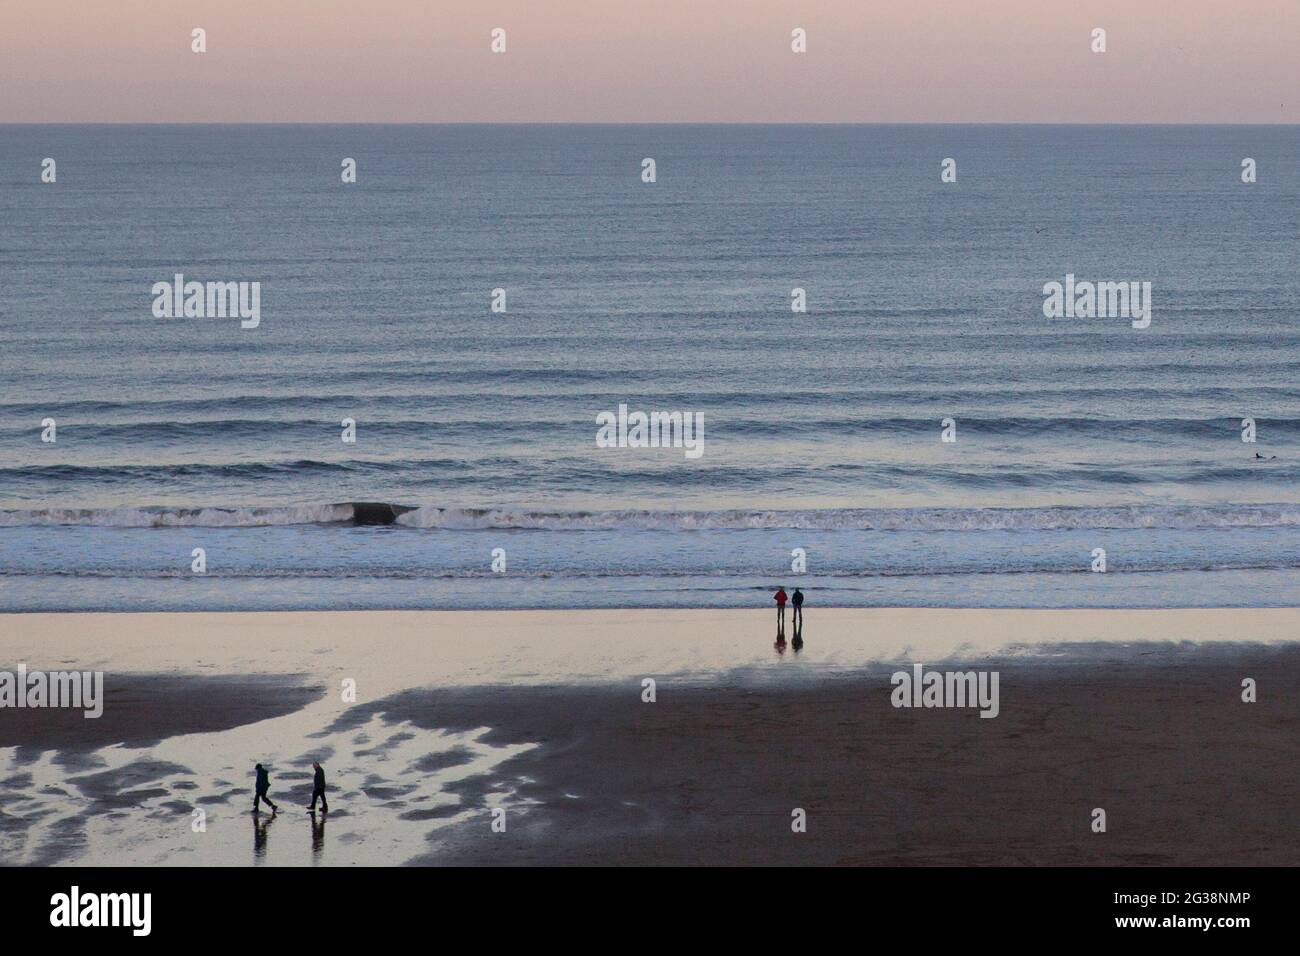 People walking along a beach in North England Stock Photo